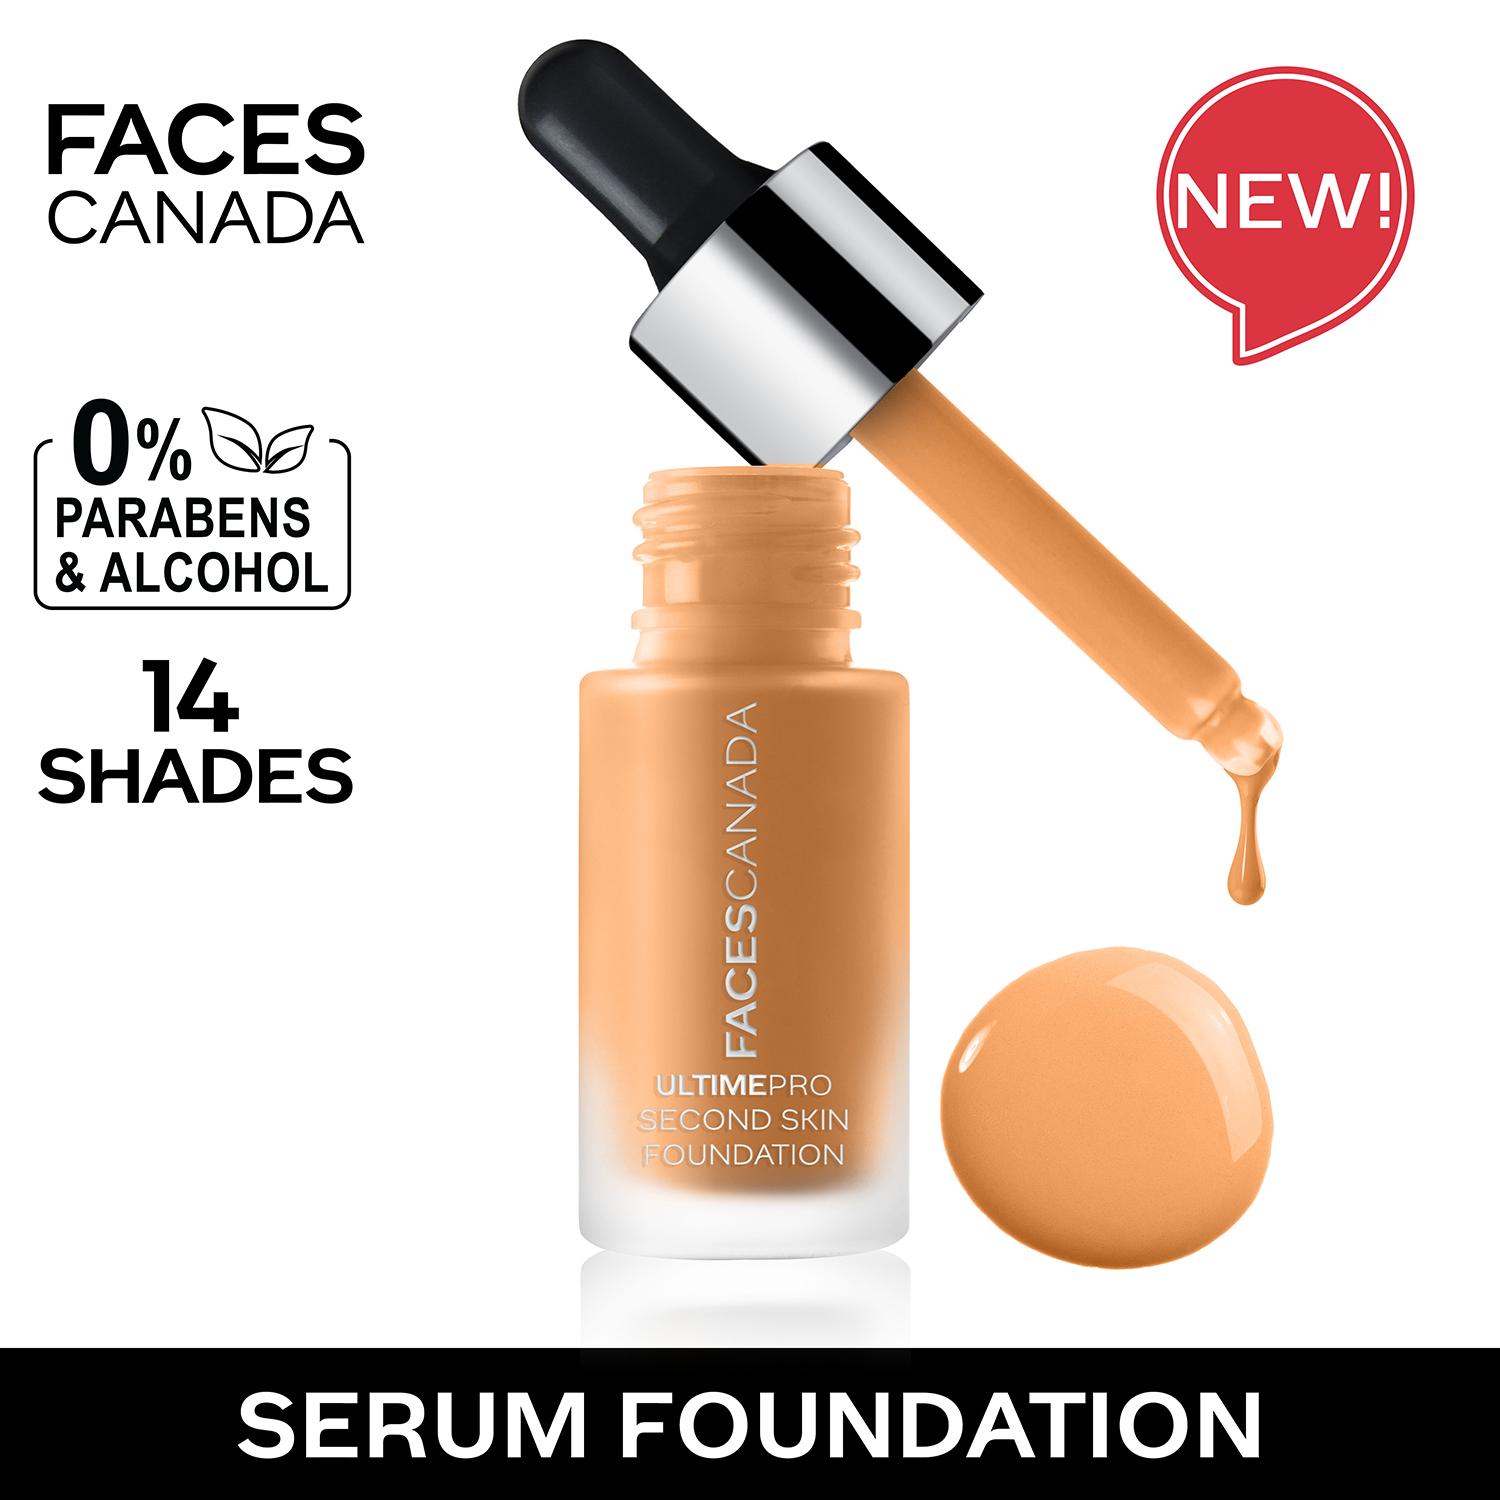 Faces Canada | Faces Canada Ultime Pro Second Skin Foundation - 31 Honey Beige (15ml)